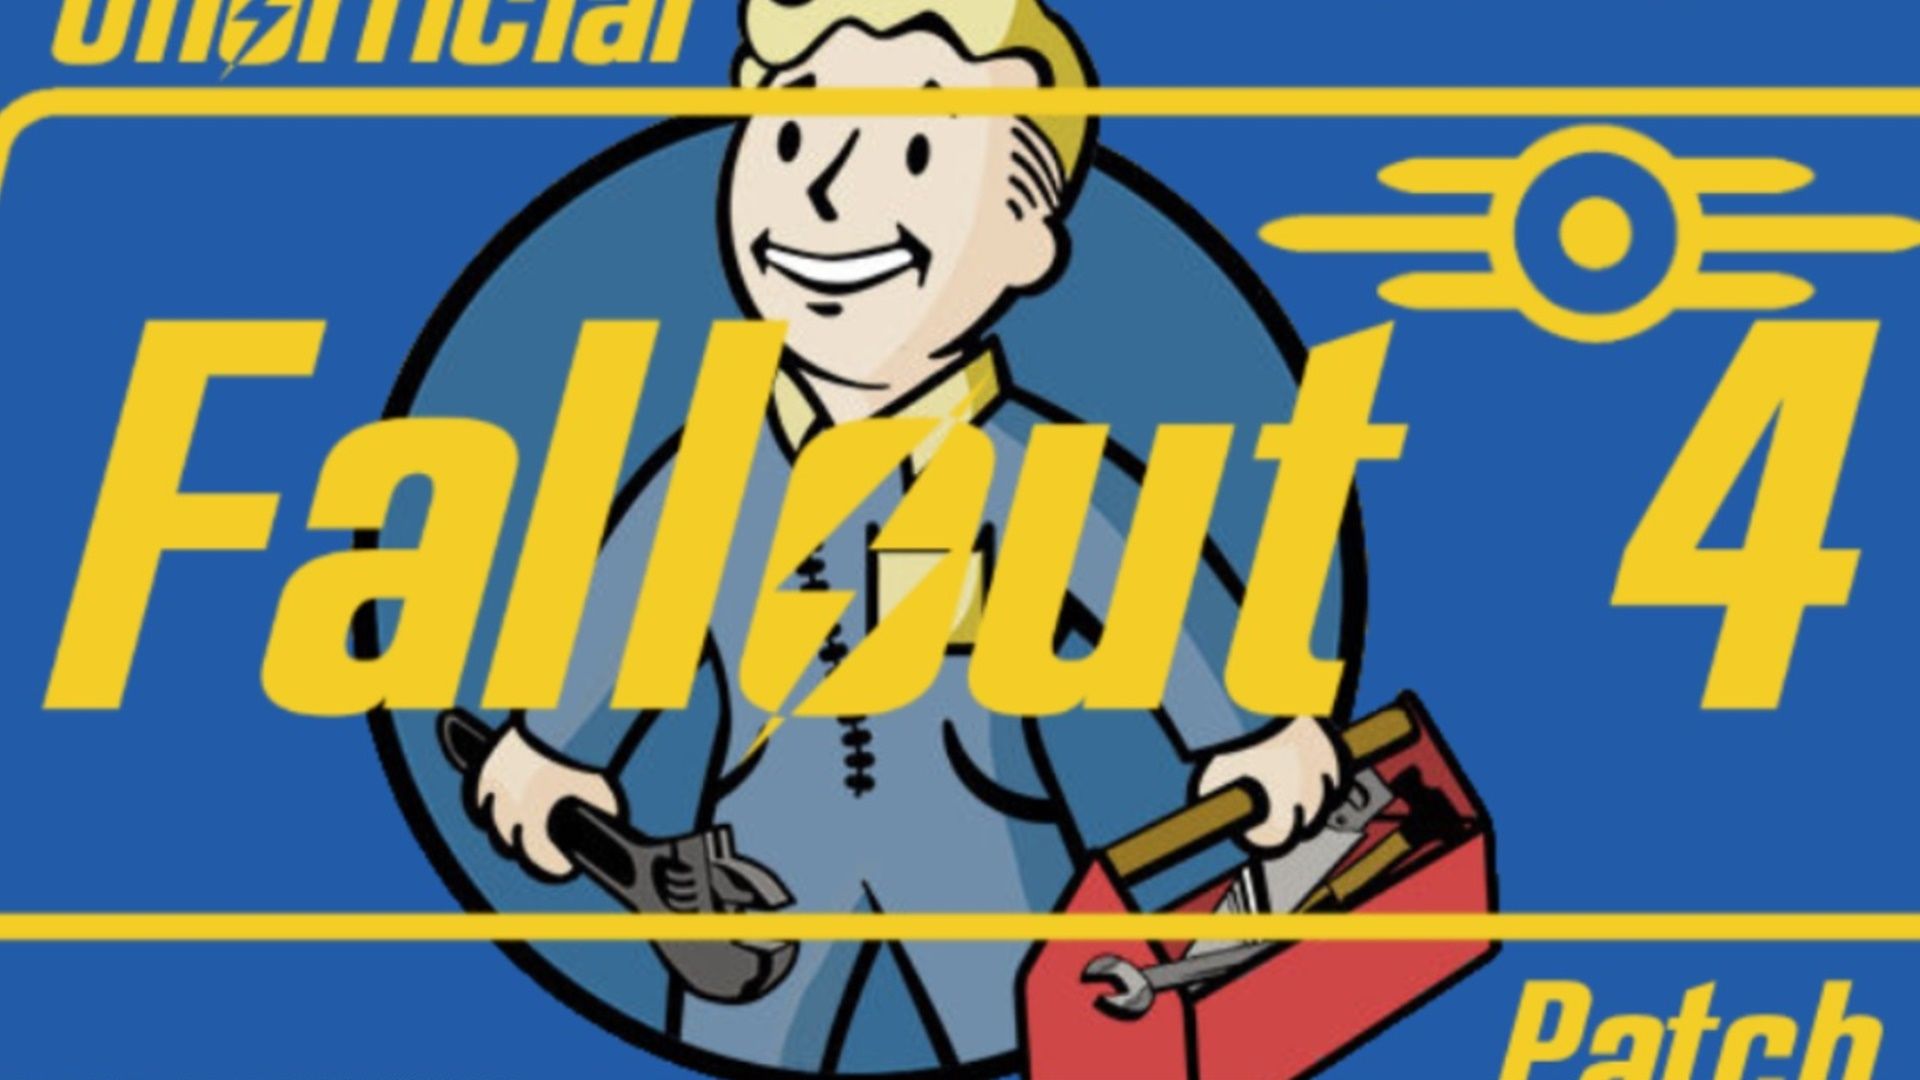 10 Insane Mods That Turn Fallout: New Vegas Into Fallout 4 – Page 7